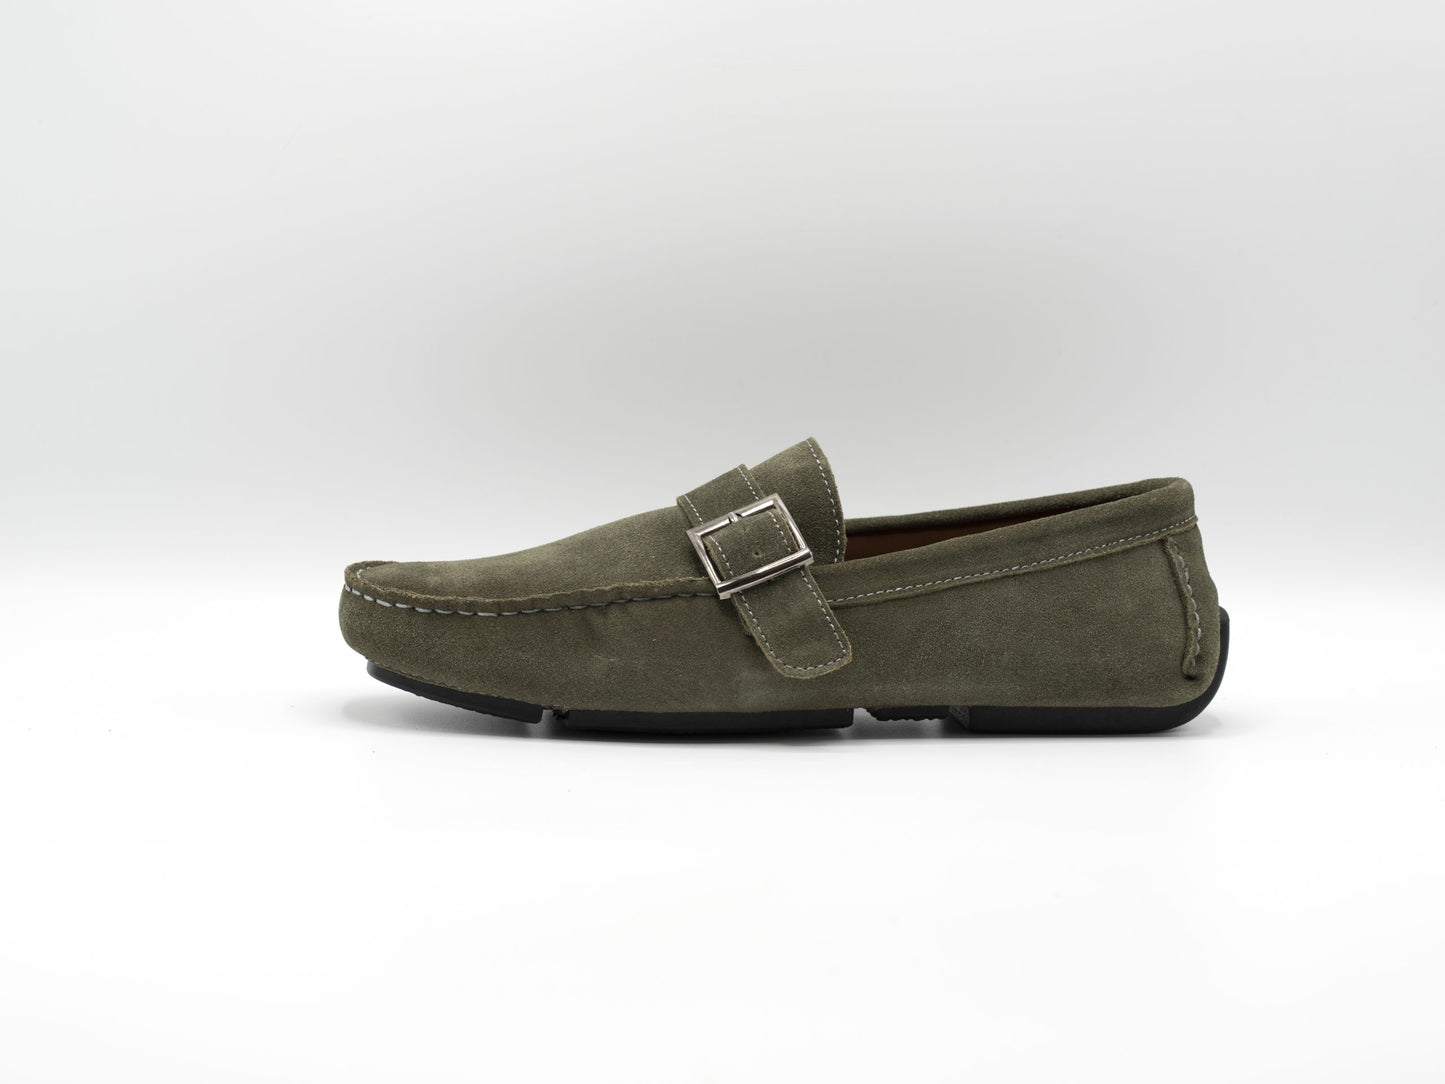 Suede Loafer Olive Green with Buckle